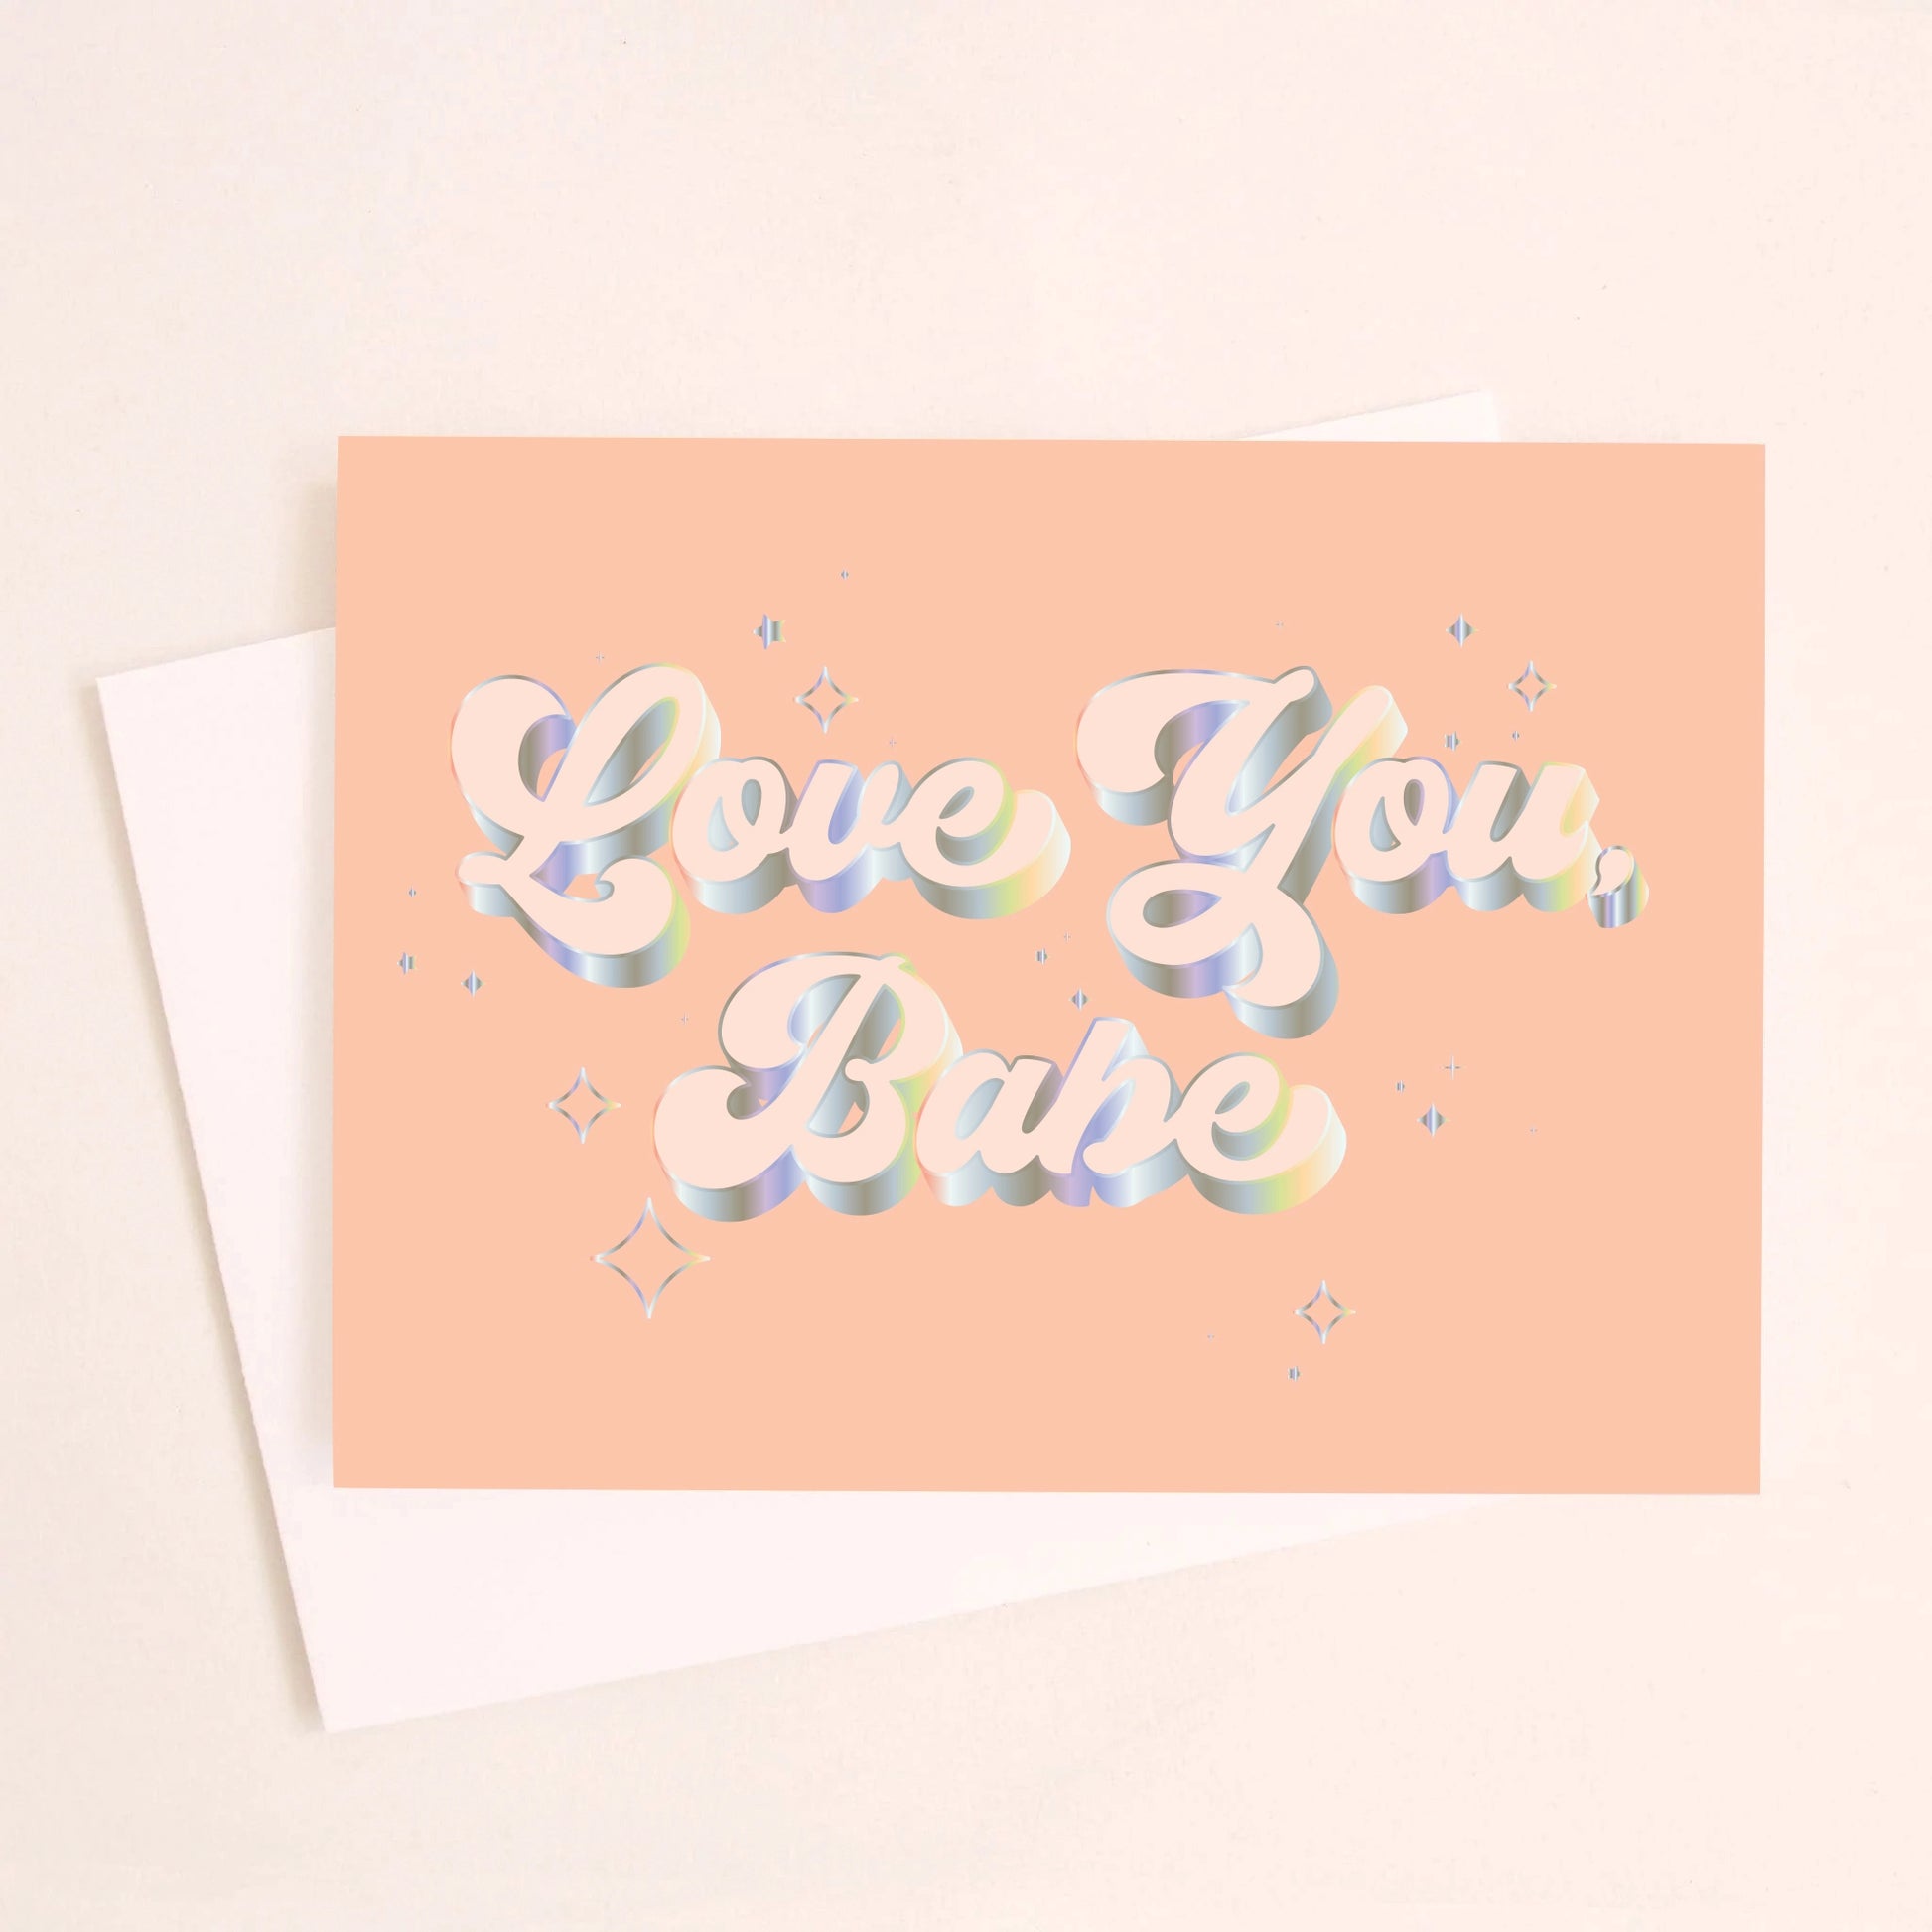 On a light peach background is a peachy greeting card with "Love You Babe" text in the center that is outlined with holographic foil detailing. Also included is a white envelope. 